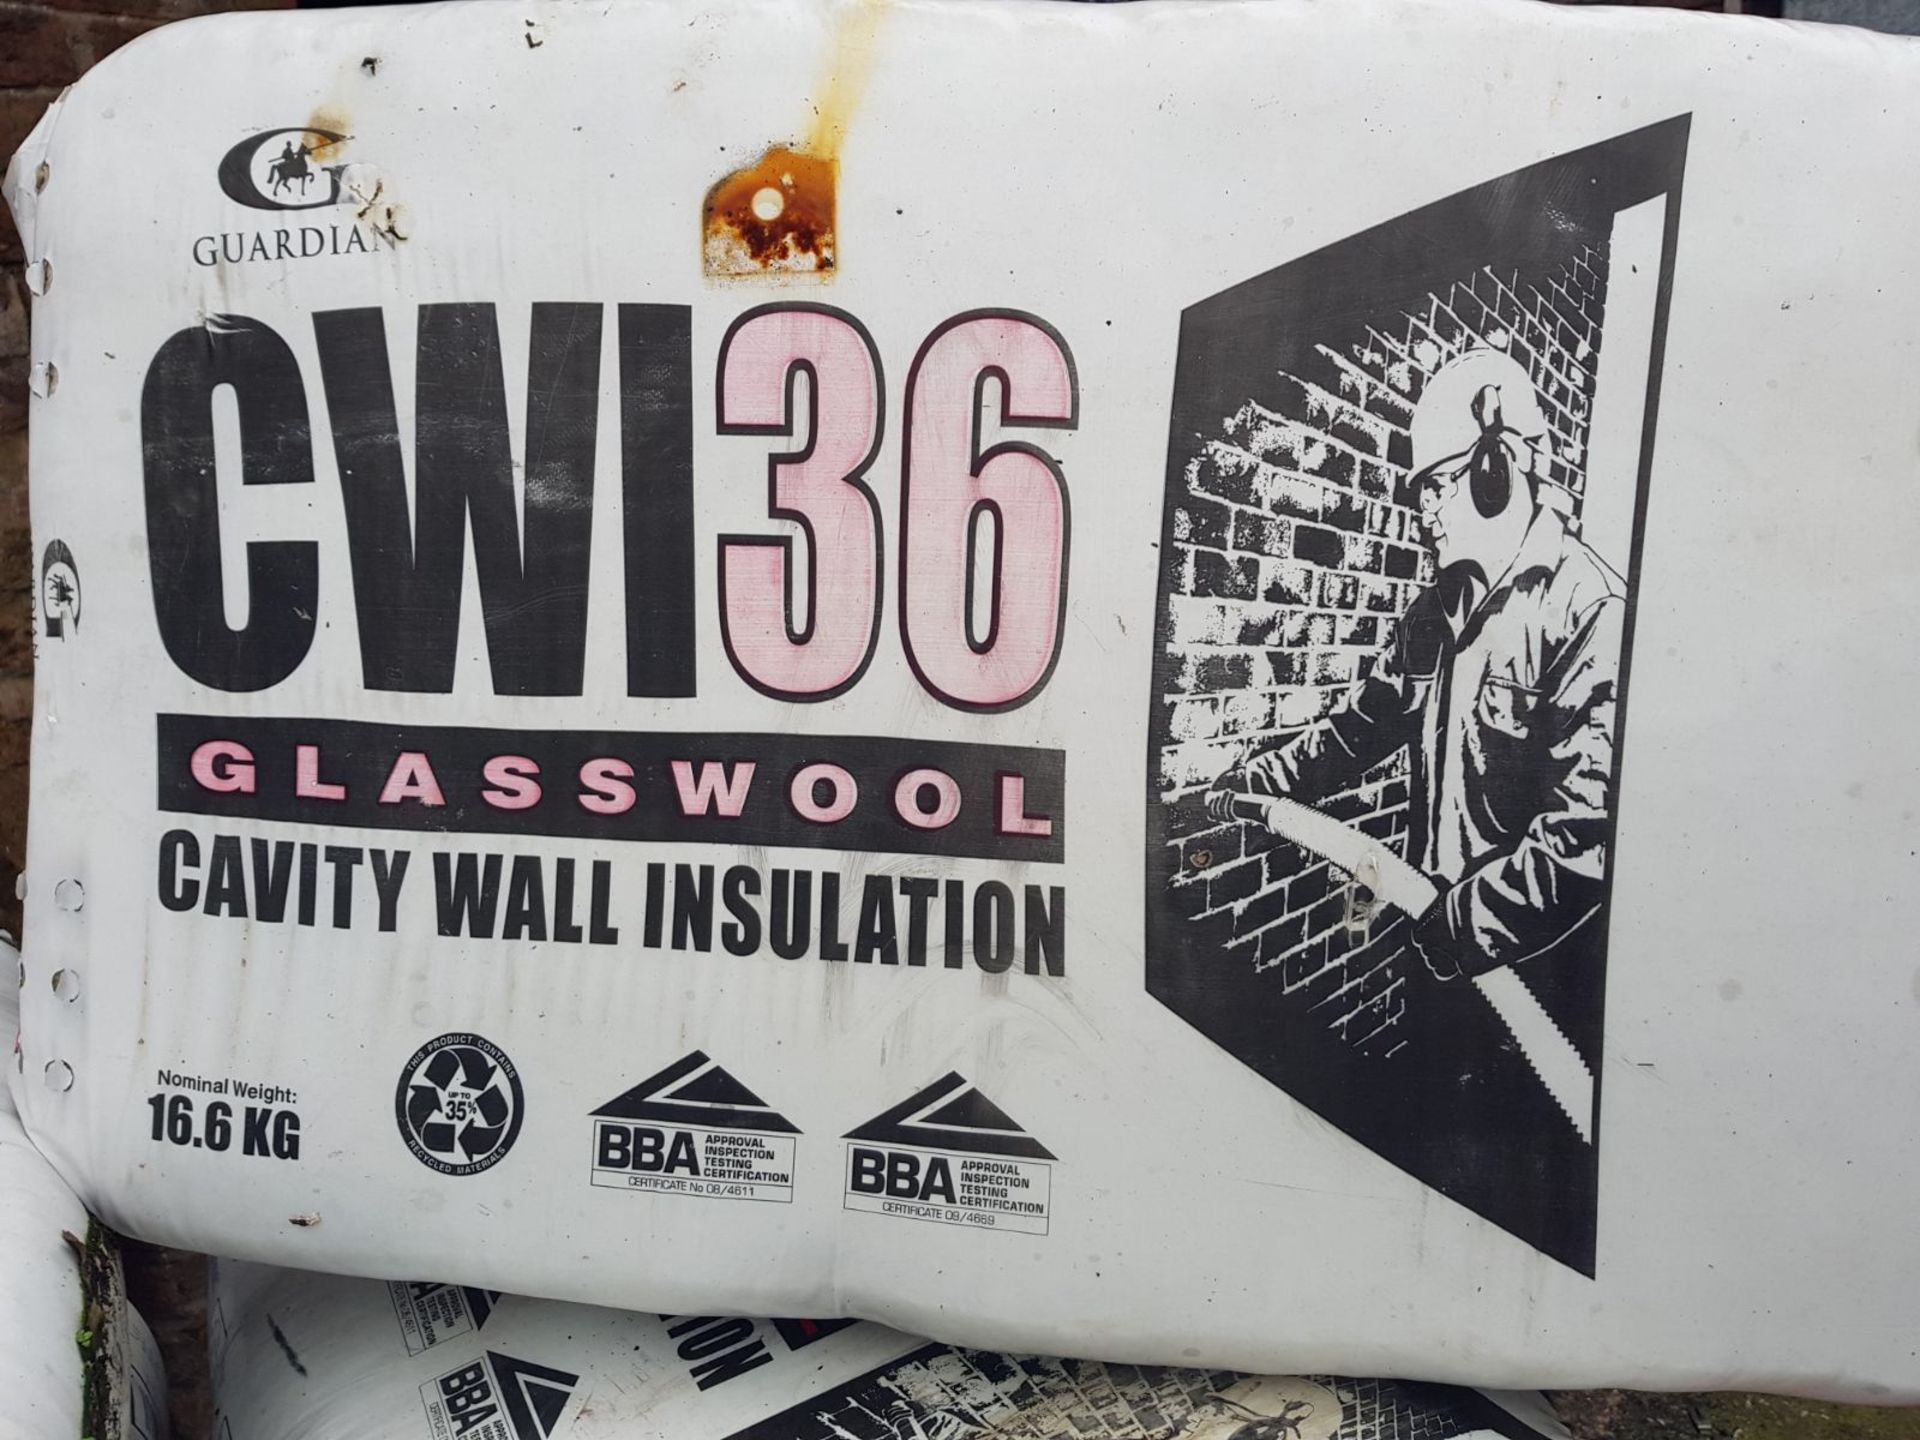 CWI 36 GLASSWOOL CAVITY WALL INSULATION *NO VAT* - Image 2 of 3